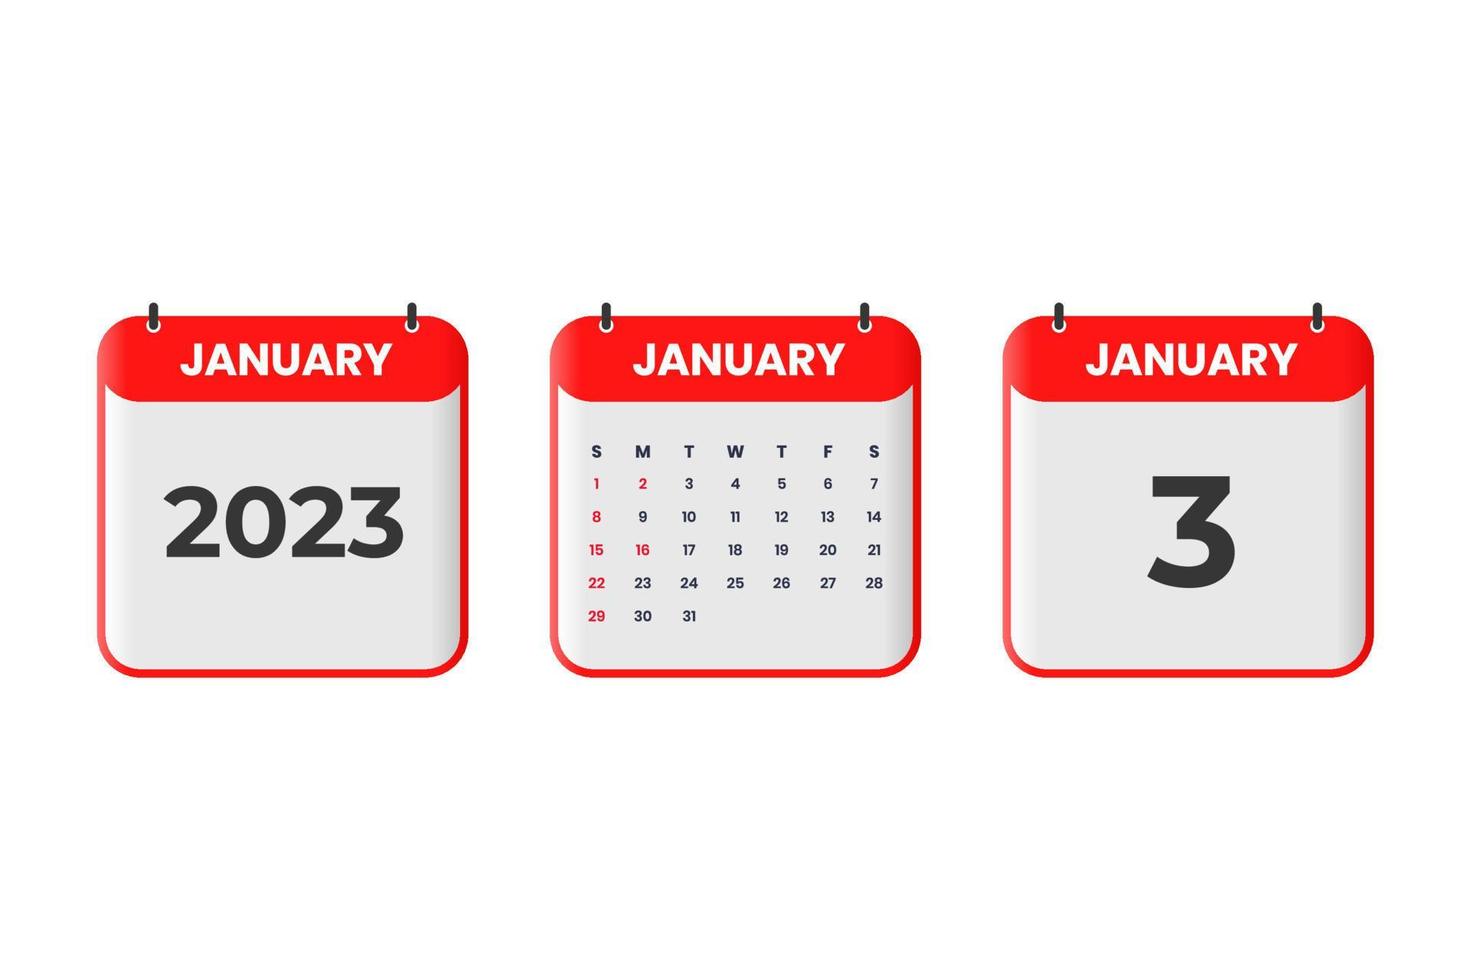 January 2023 calendar design. 3rd January 2023 calendar icon for schedule, appointment, important date concept vector